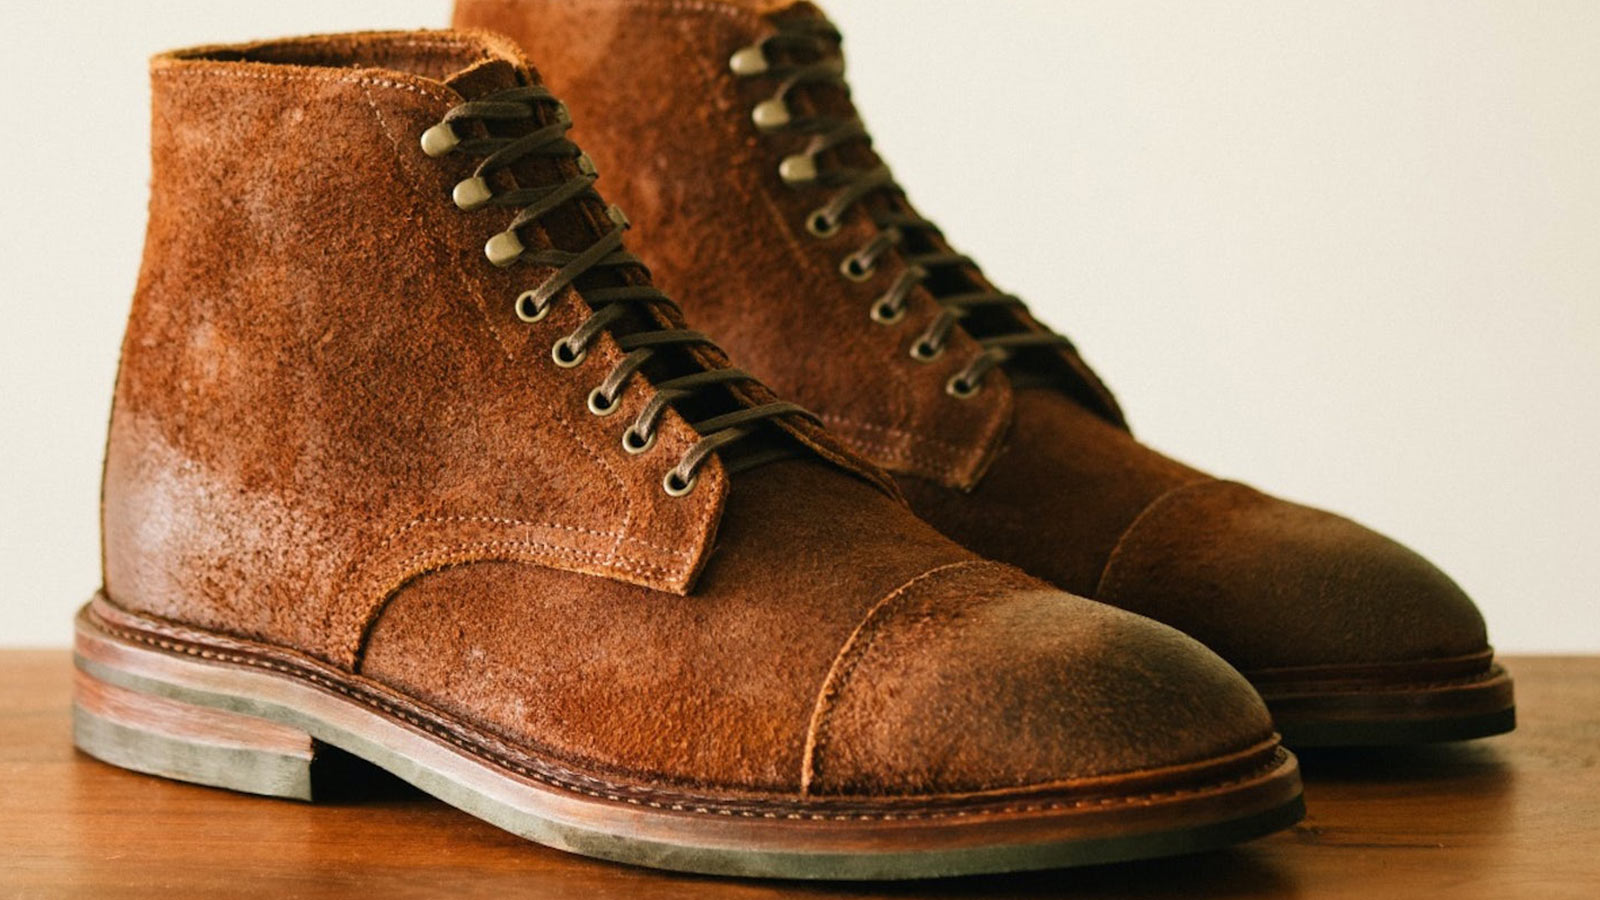 Oak Street Bootmakers Lakeshore Boot in Trail Crazy Horse Roughout